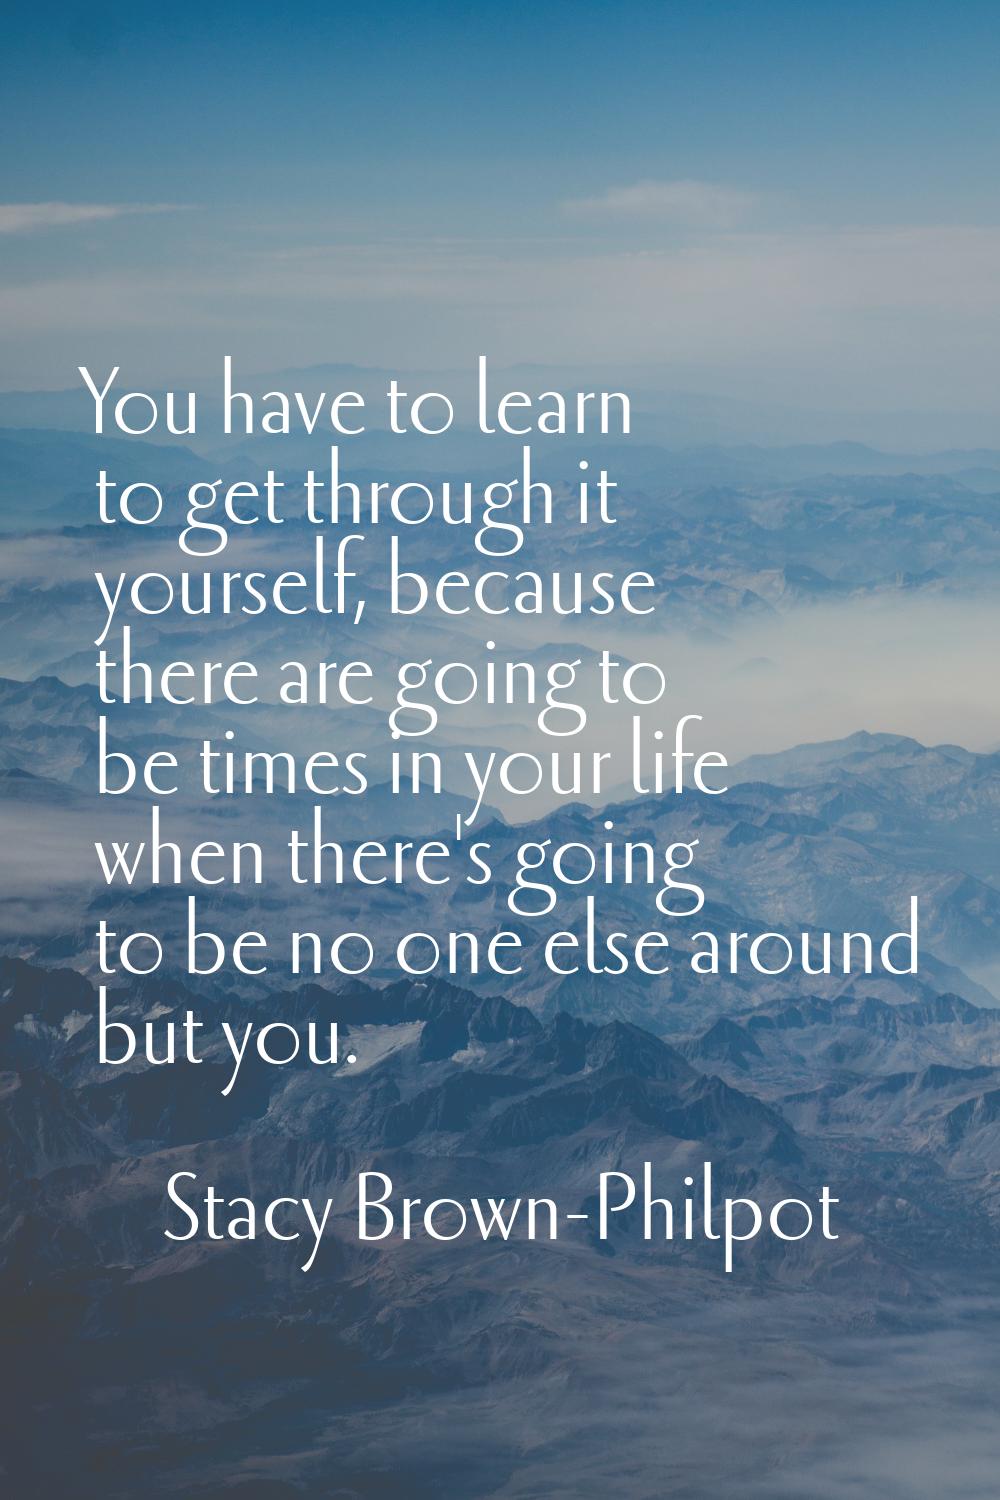 You have to learn to get through it yourself, because there are going to be times in your life when